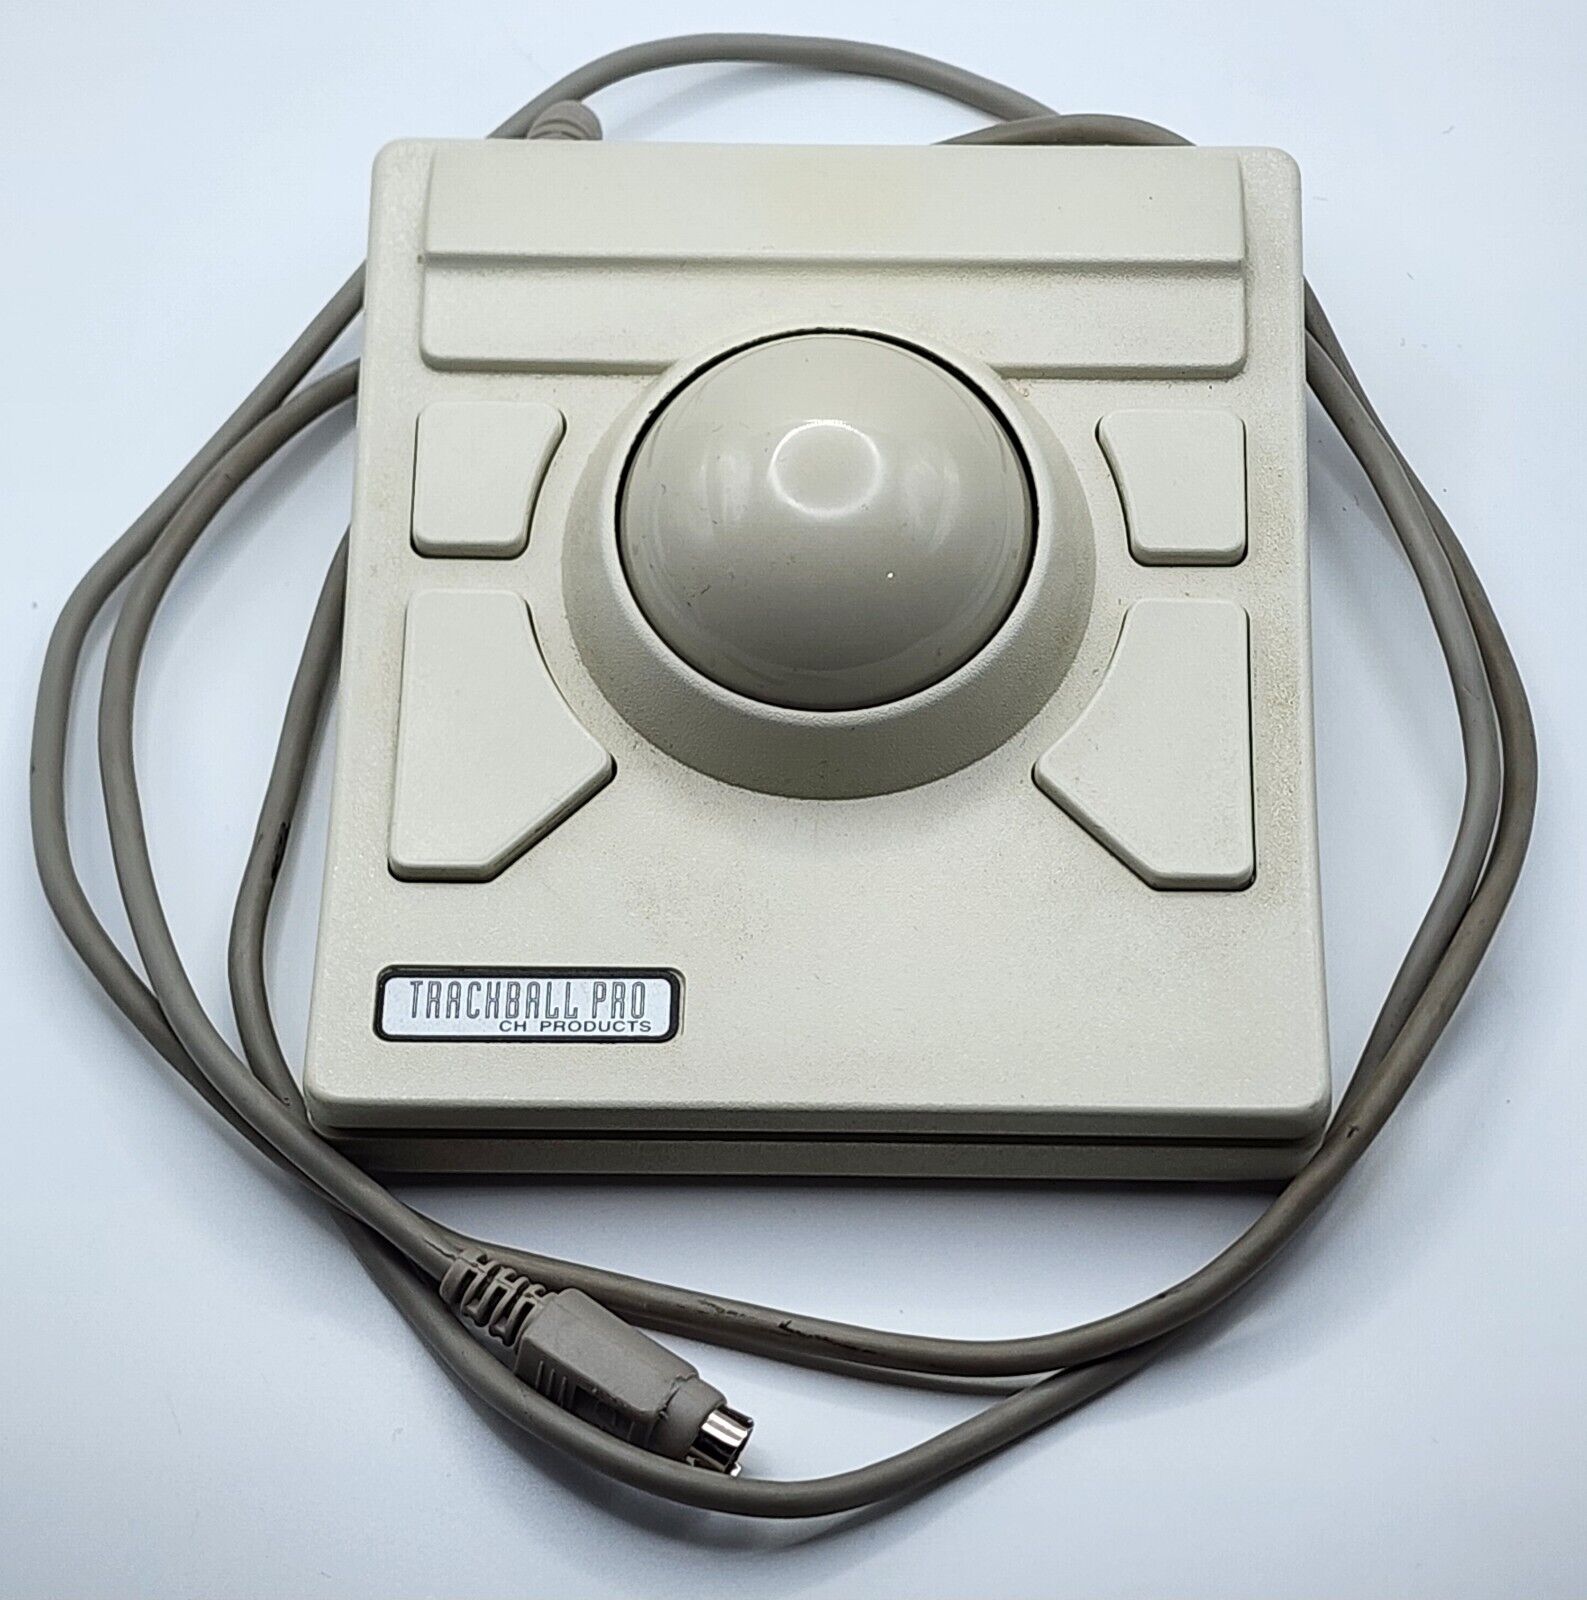 Vintage Ch Products Trackball Pro PC Gaming